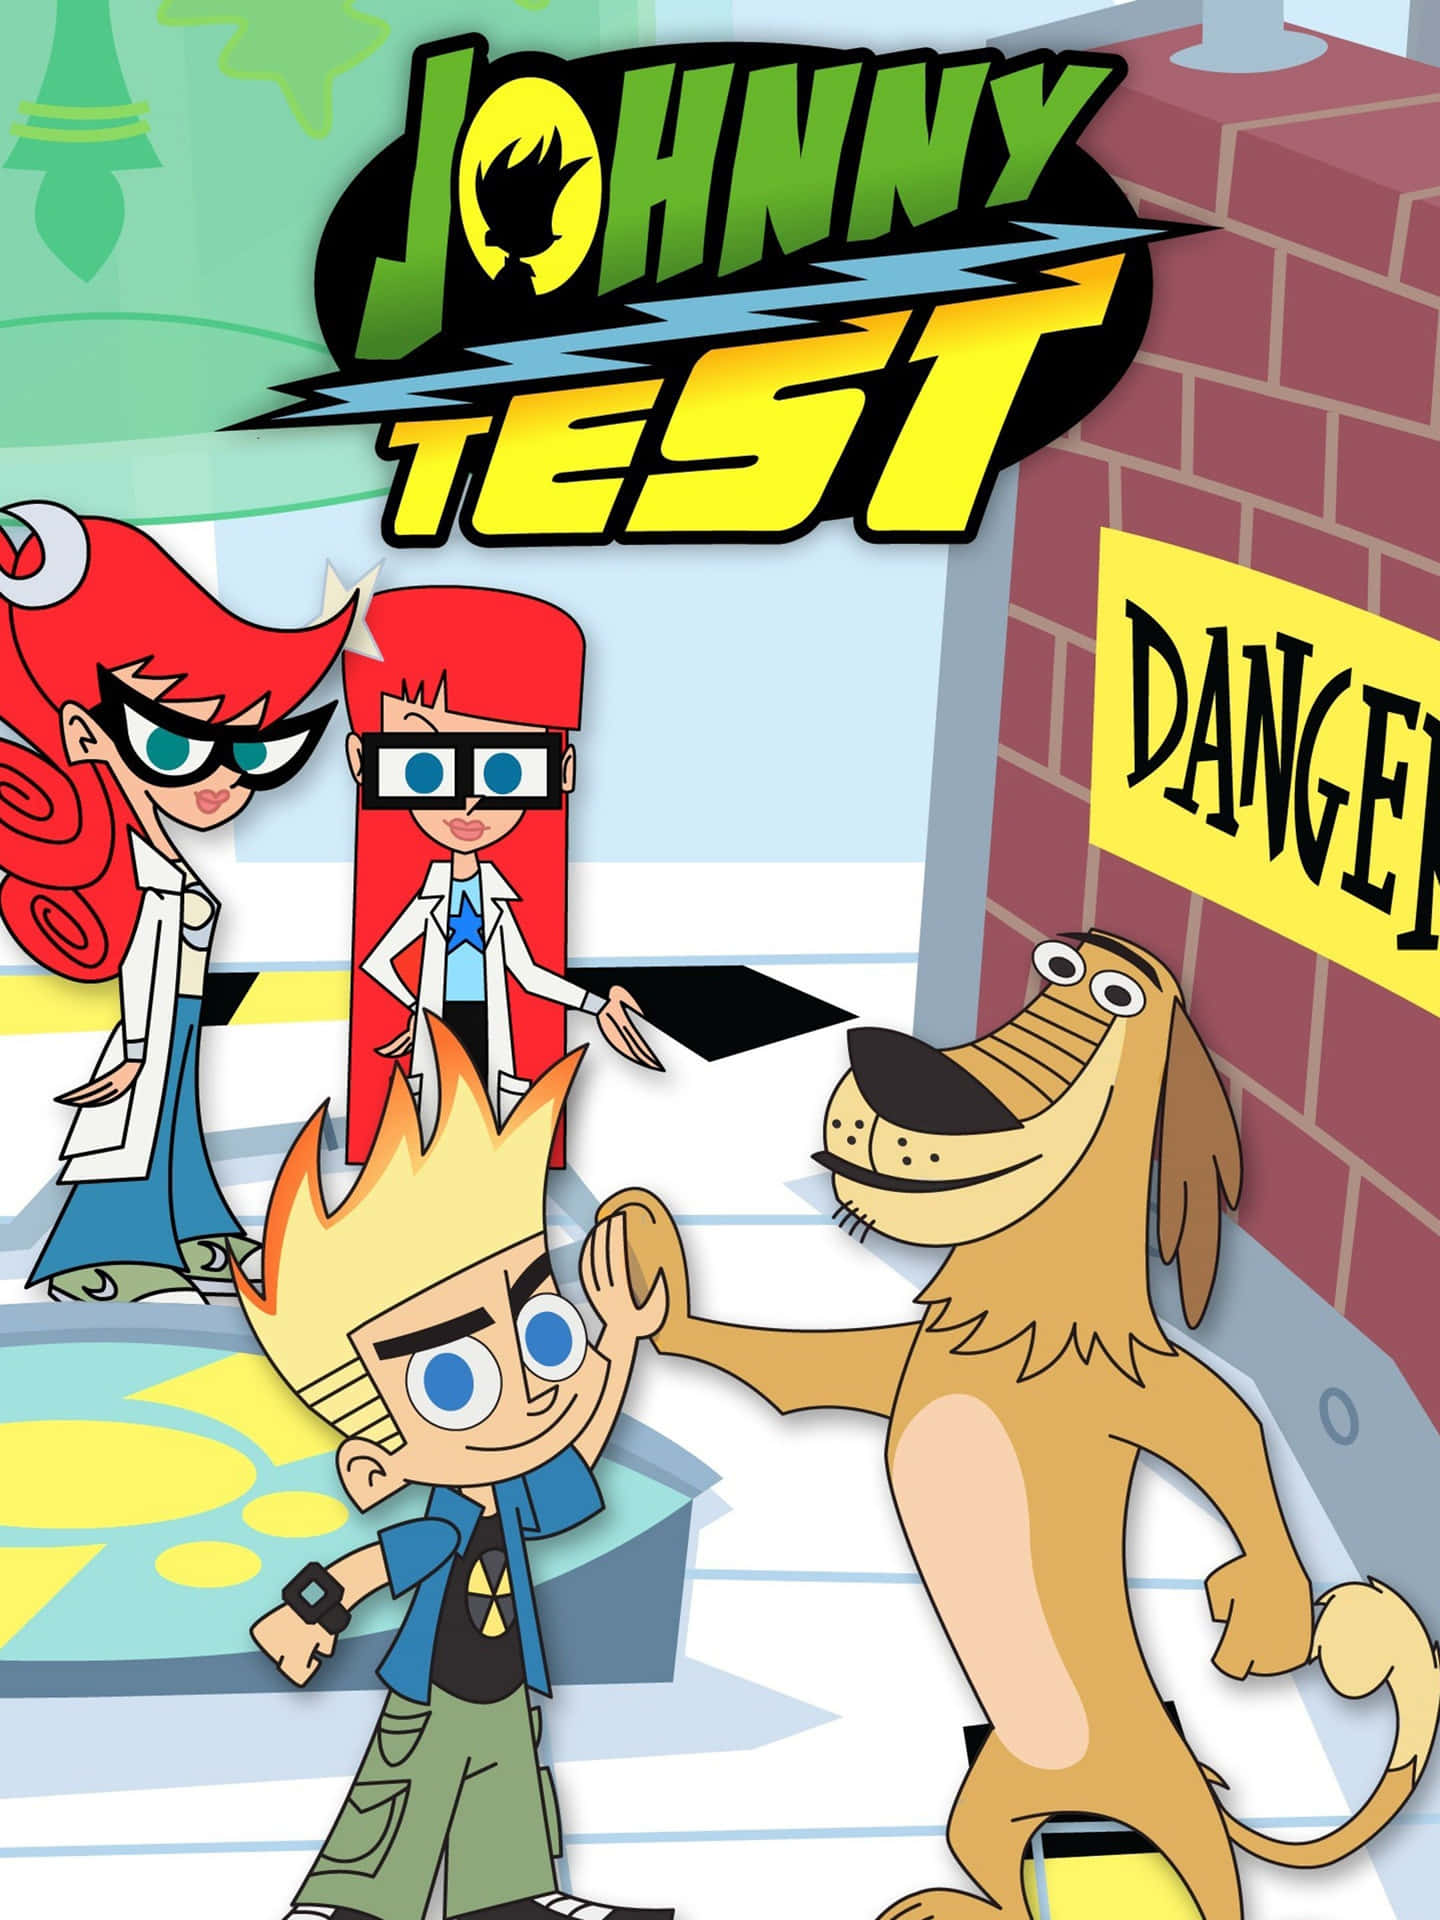 Johnny Test and Dukey posing together in an action-packed scene Wallpaper